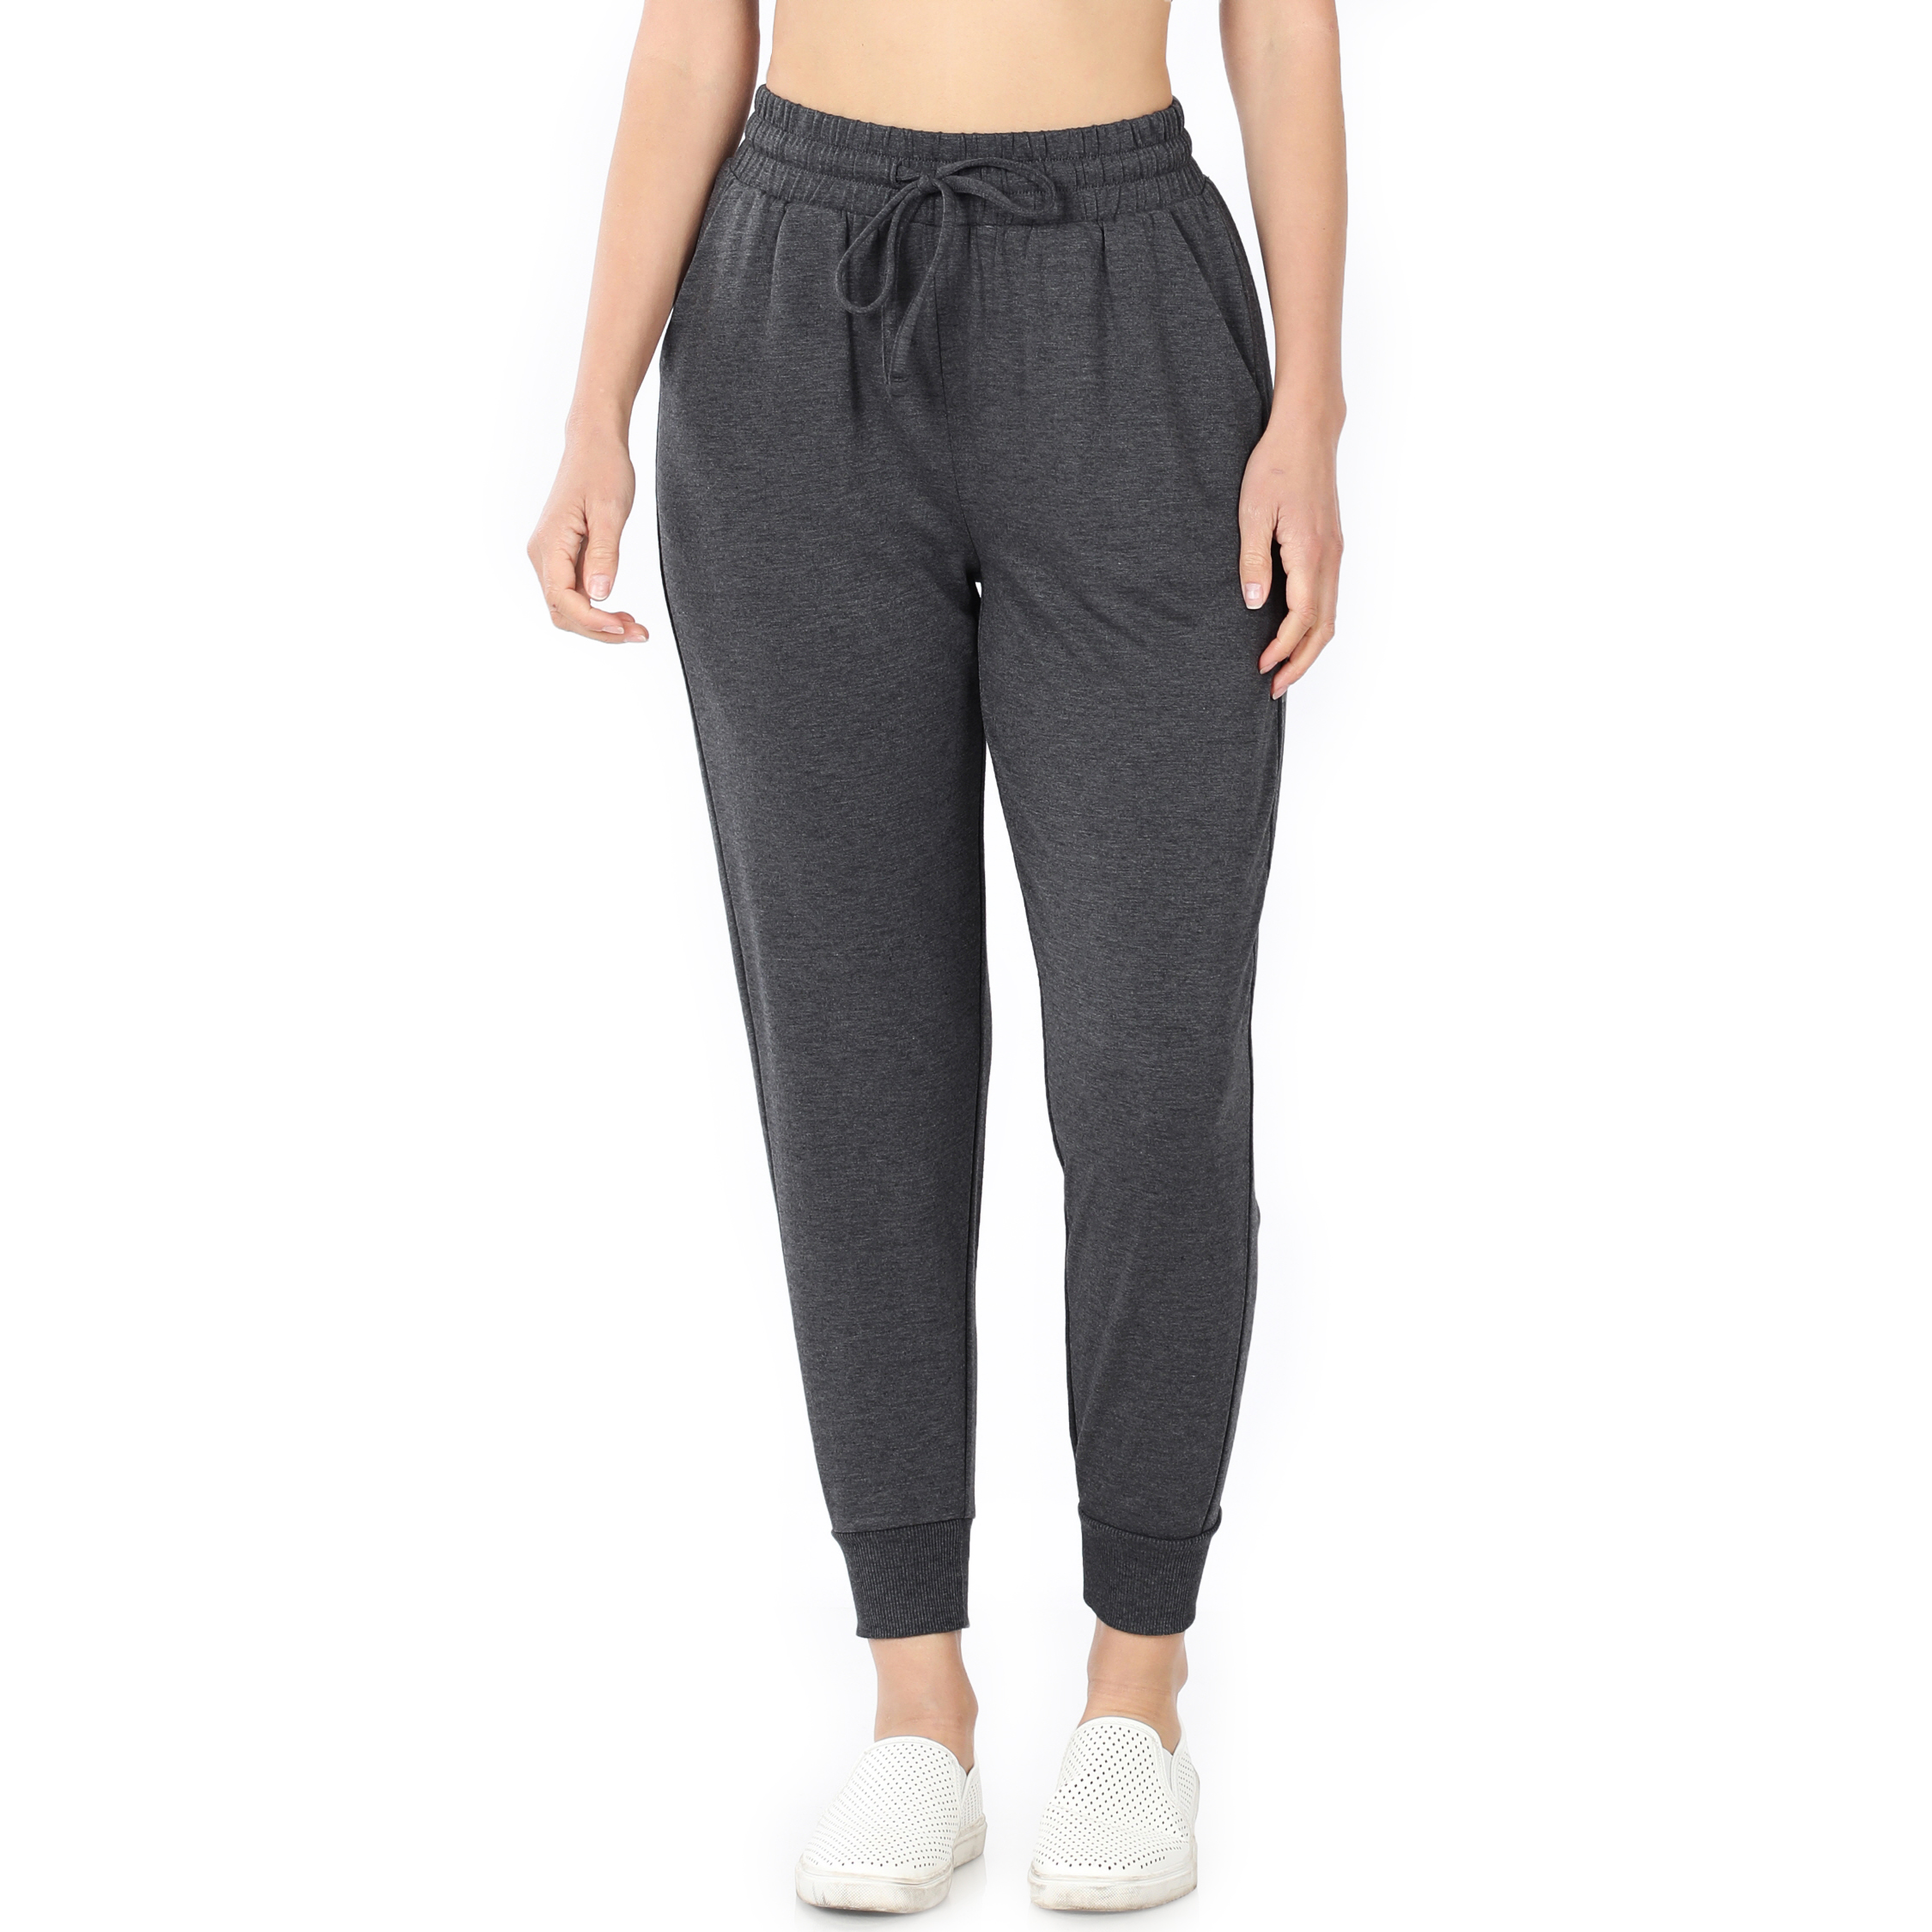 Women's Joggers Sweatpants Workout Pants with pockets,  Elastic Waistband with Draw String,